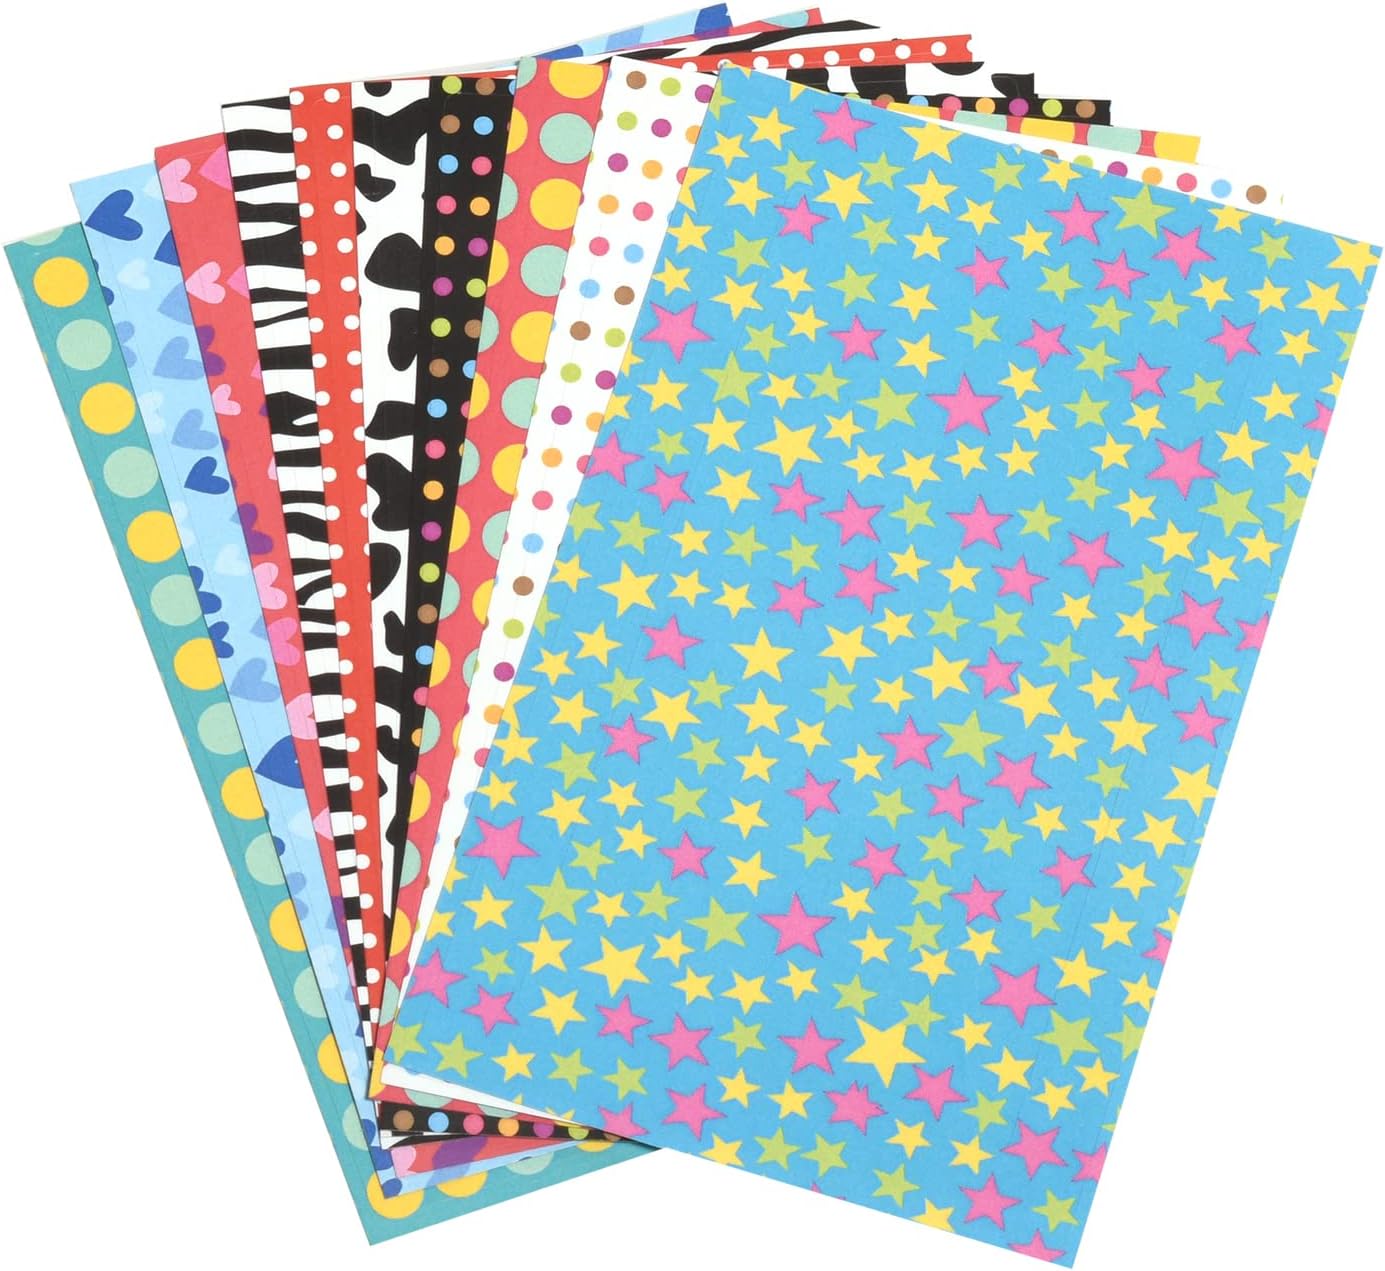 Zink Colorful, Fun &#x26; Decorative Border Stickers for 4x6 Photo Paper Pojects